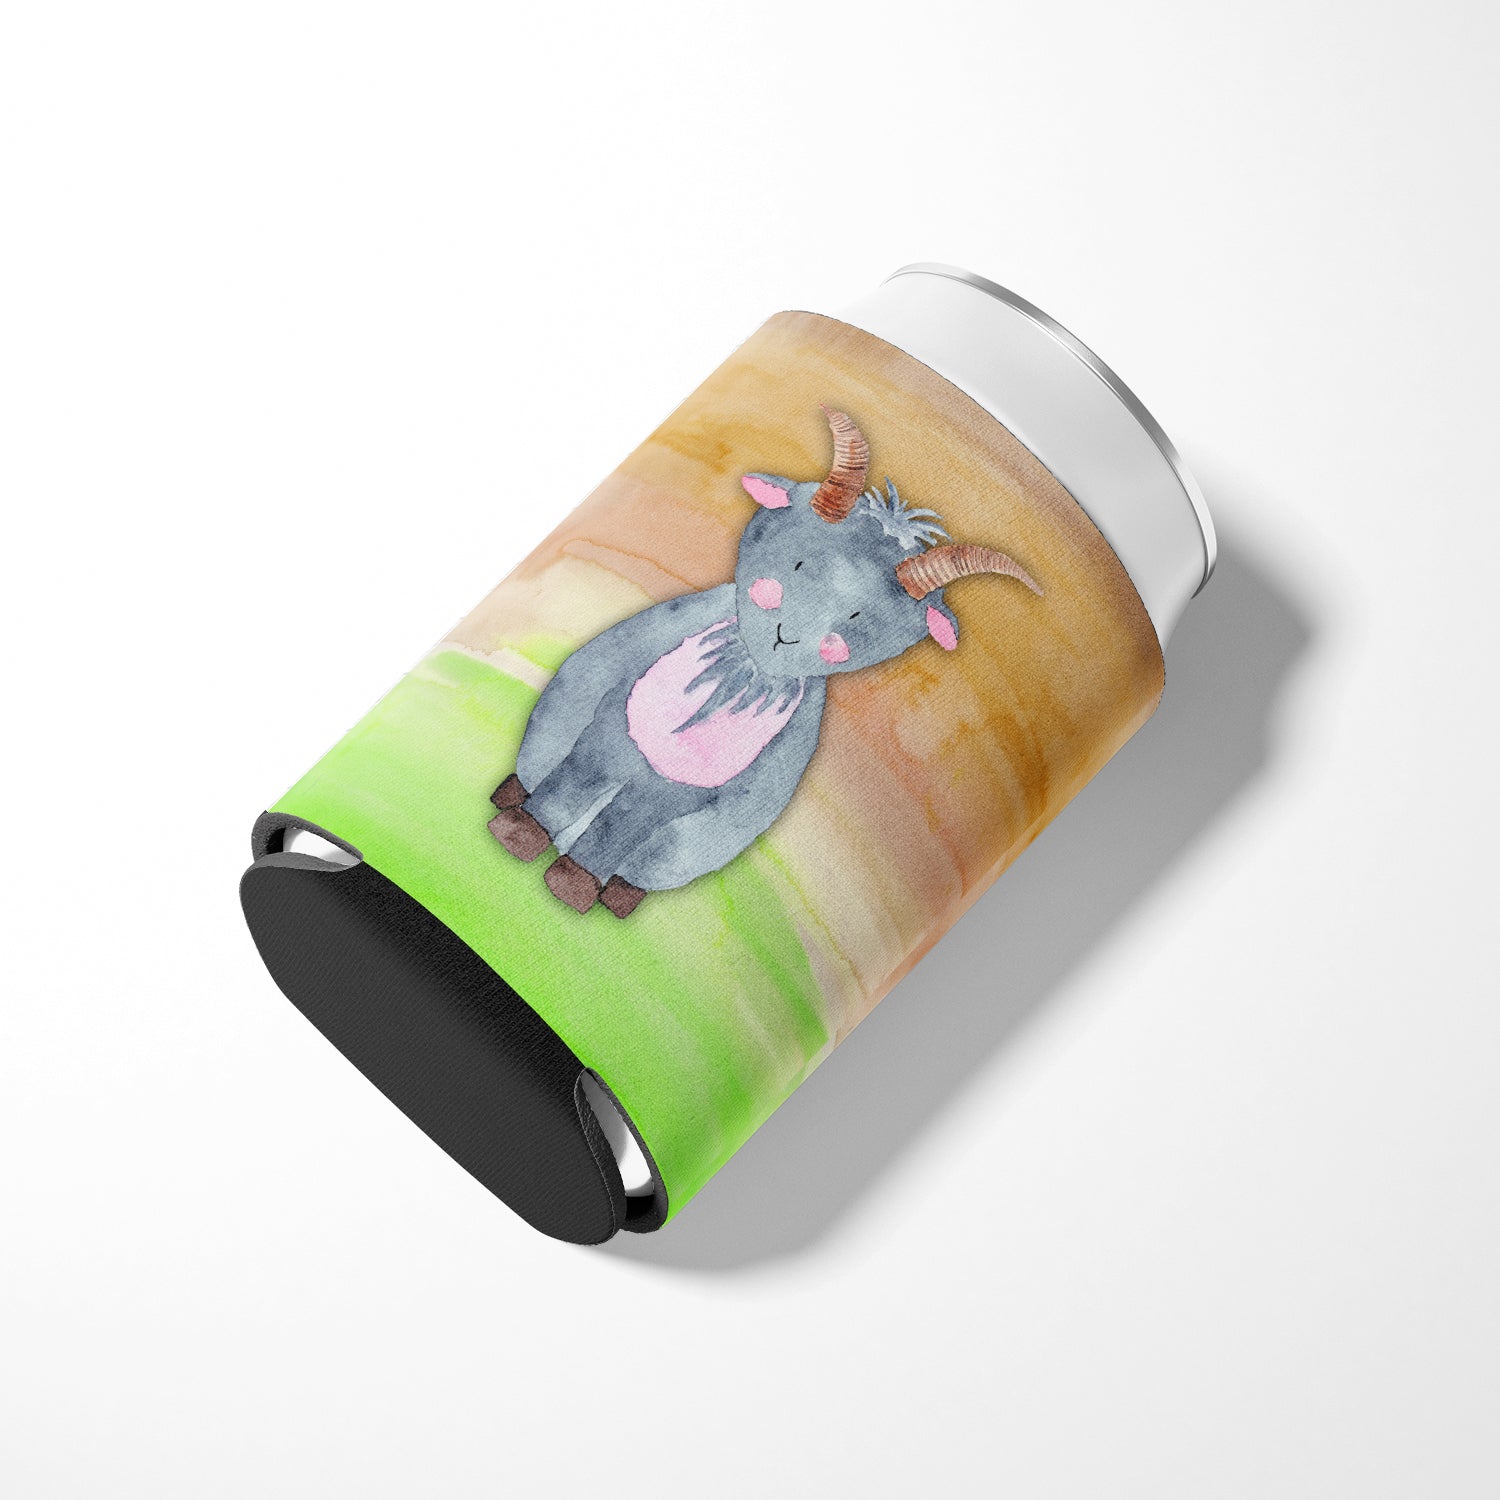 Goat Watercolor Can or Bottle Hugger BB7413CC  the-store.com.